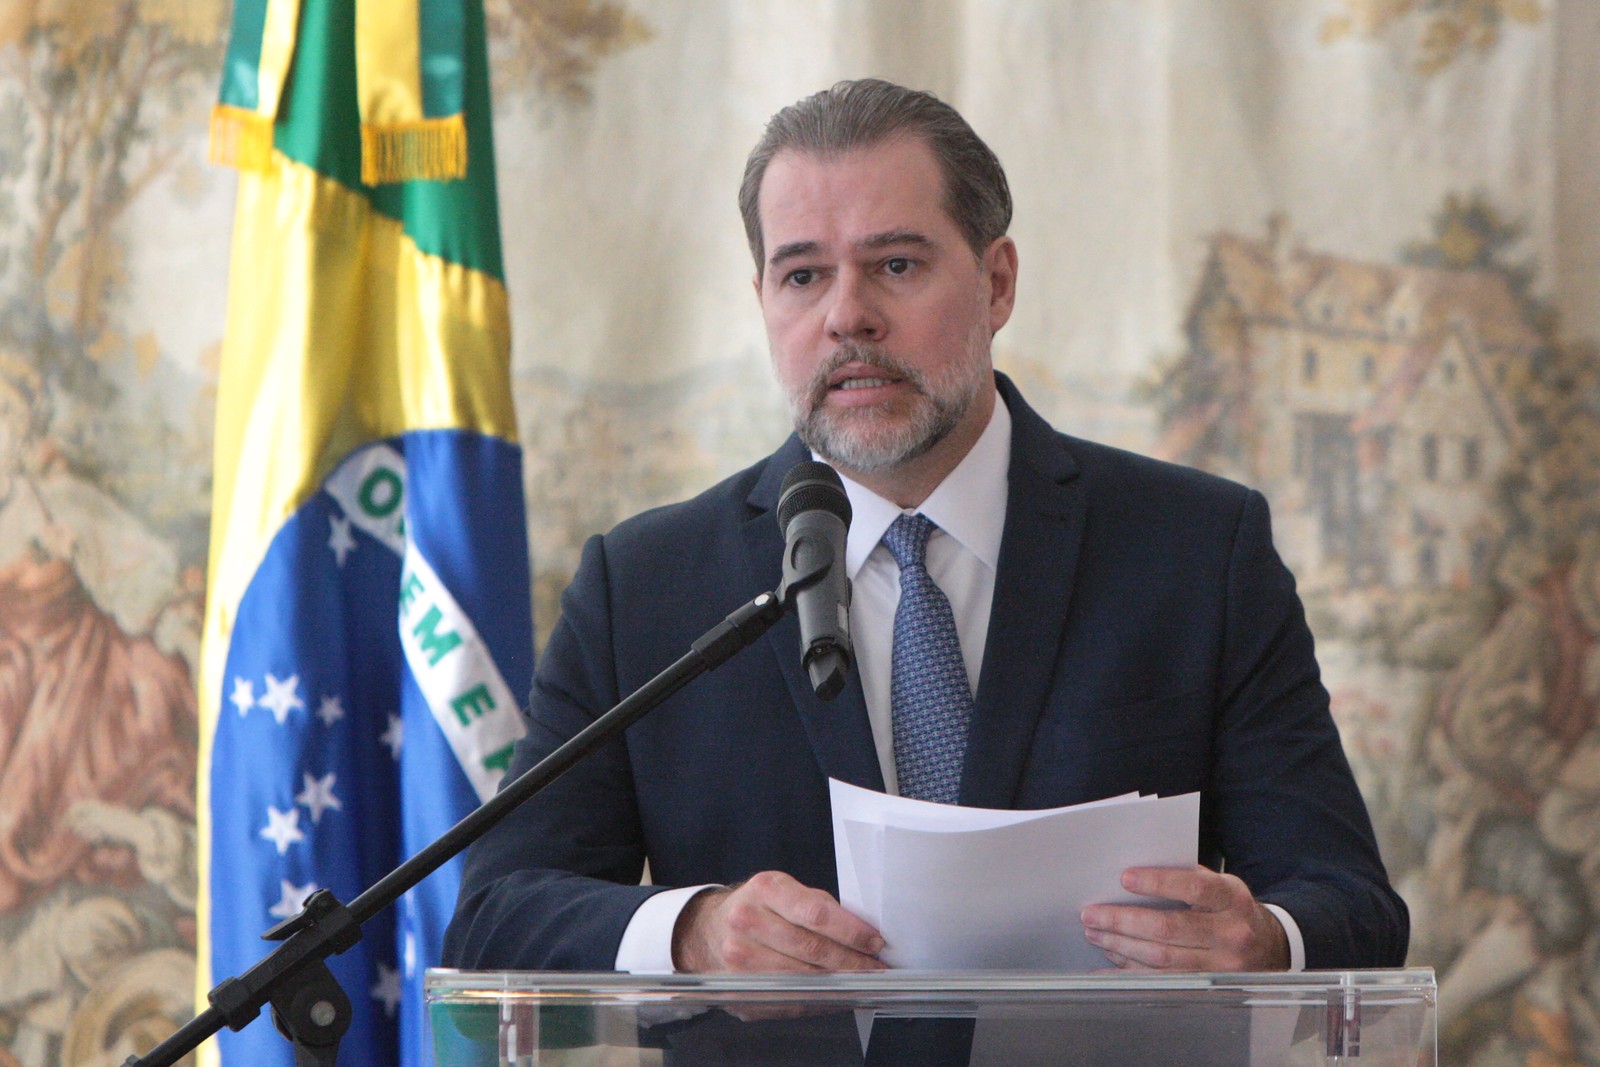 The president of the Federal Supreme Court (STF), Presiding Justice Dias Toffoli.